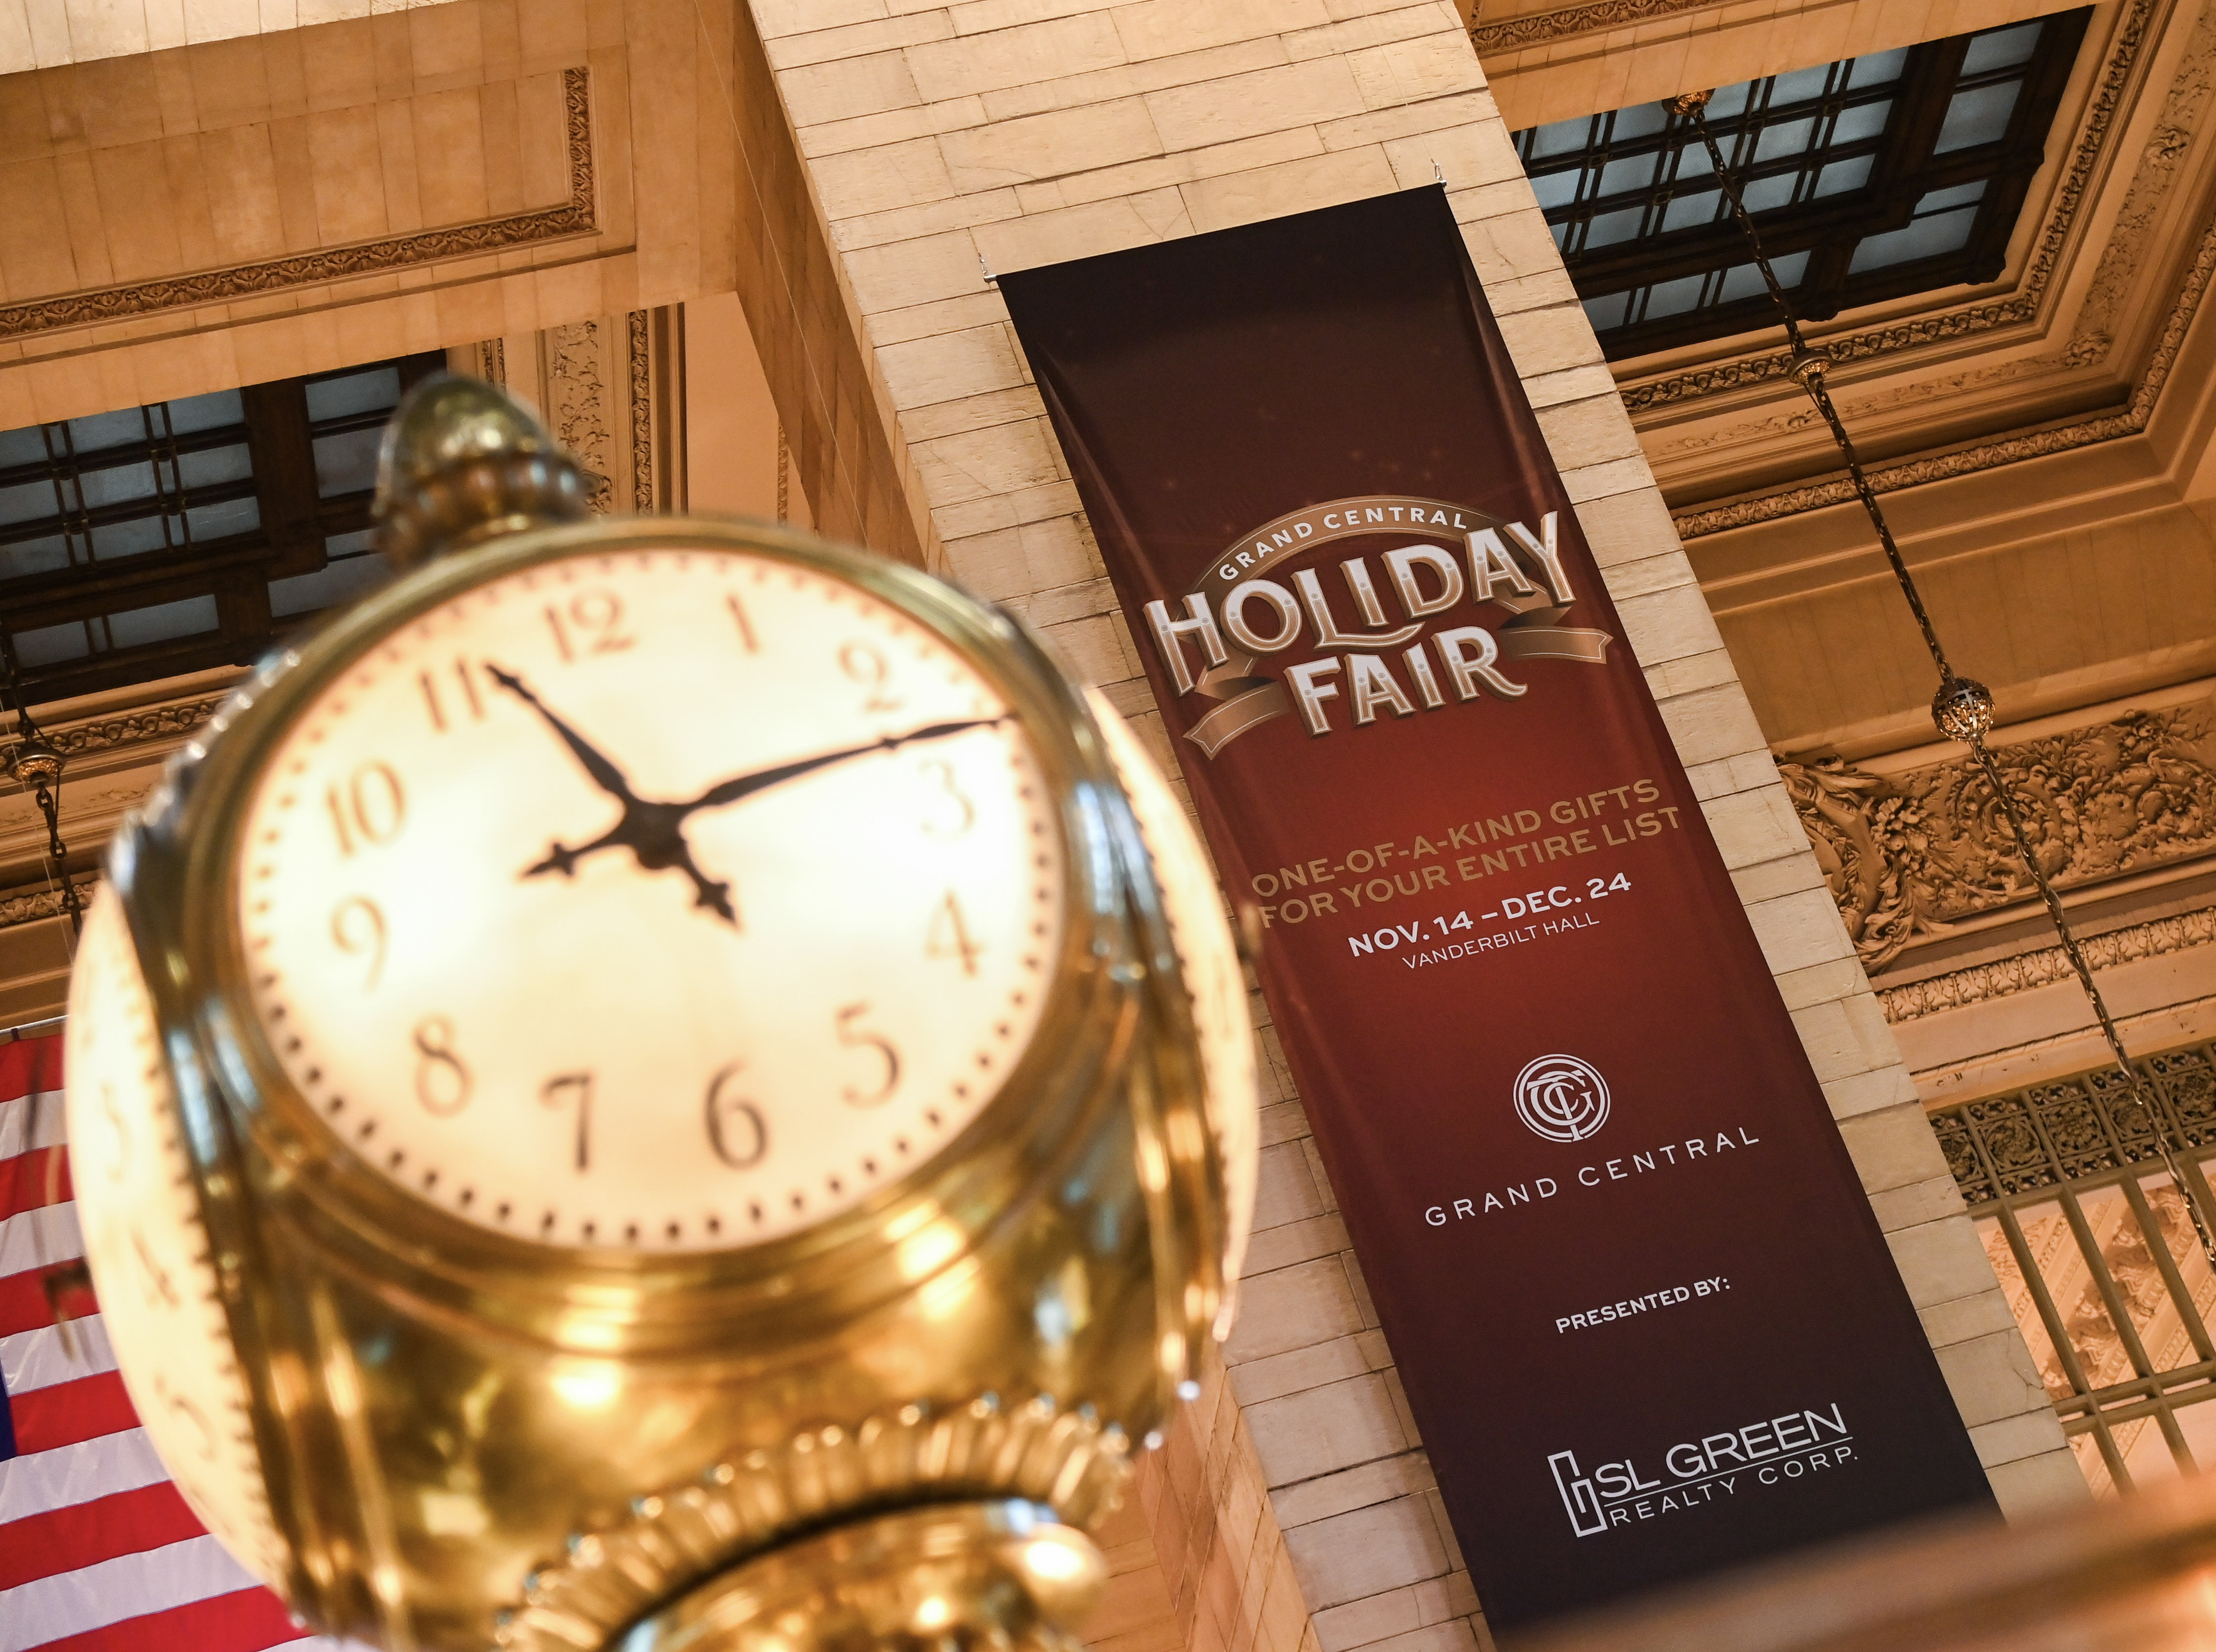 Grand Central Holiday Fair Returns After Two Years